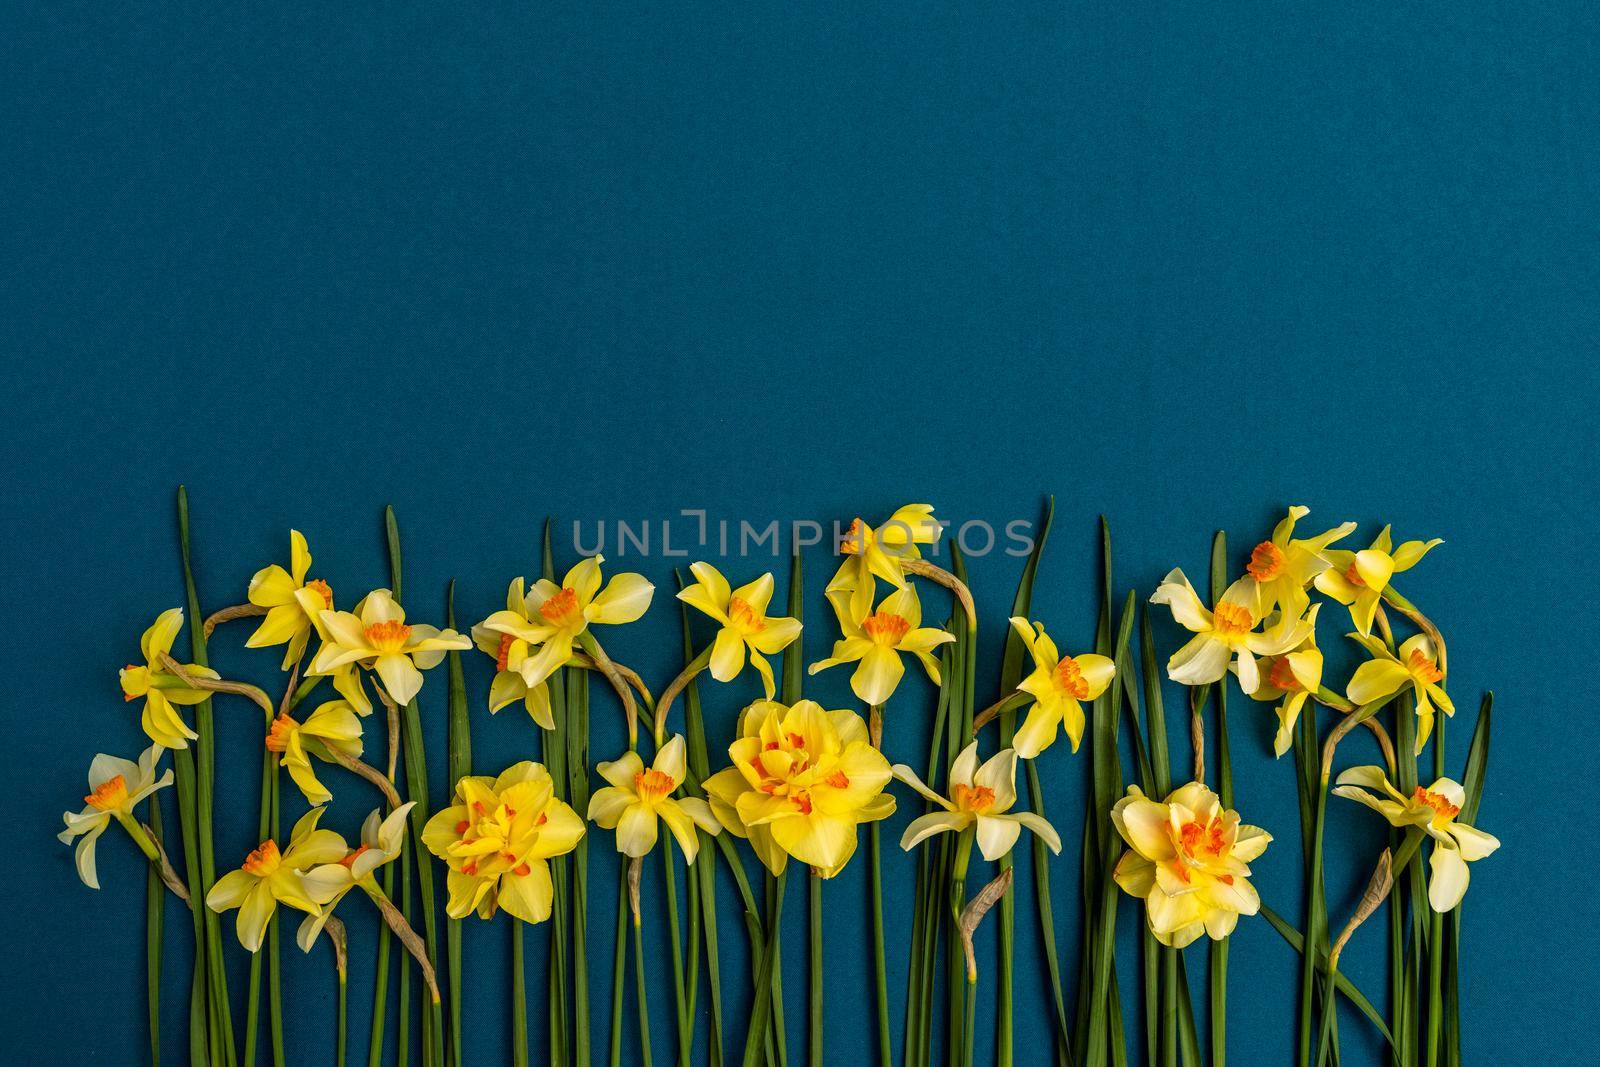 large bouquet of yellow daffodils on an indigo background. Copy space. Can be used as a card, background for screensavers, greetings